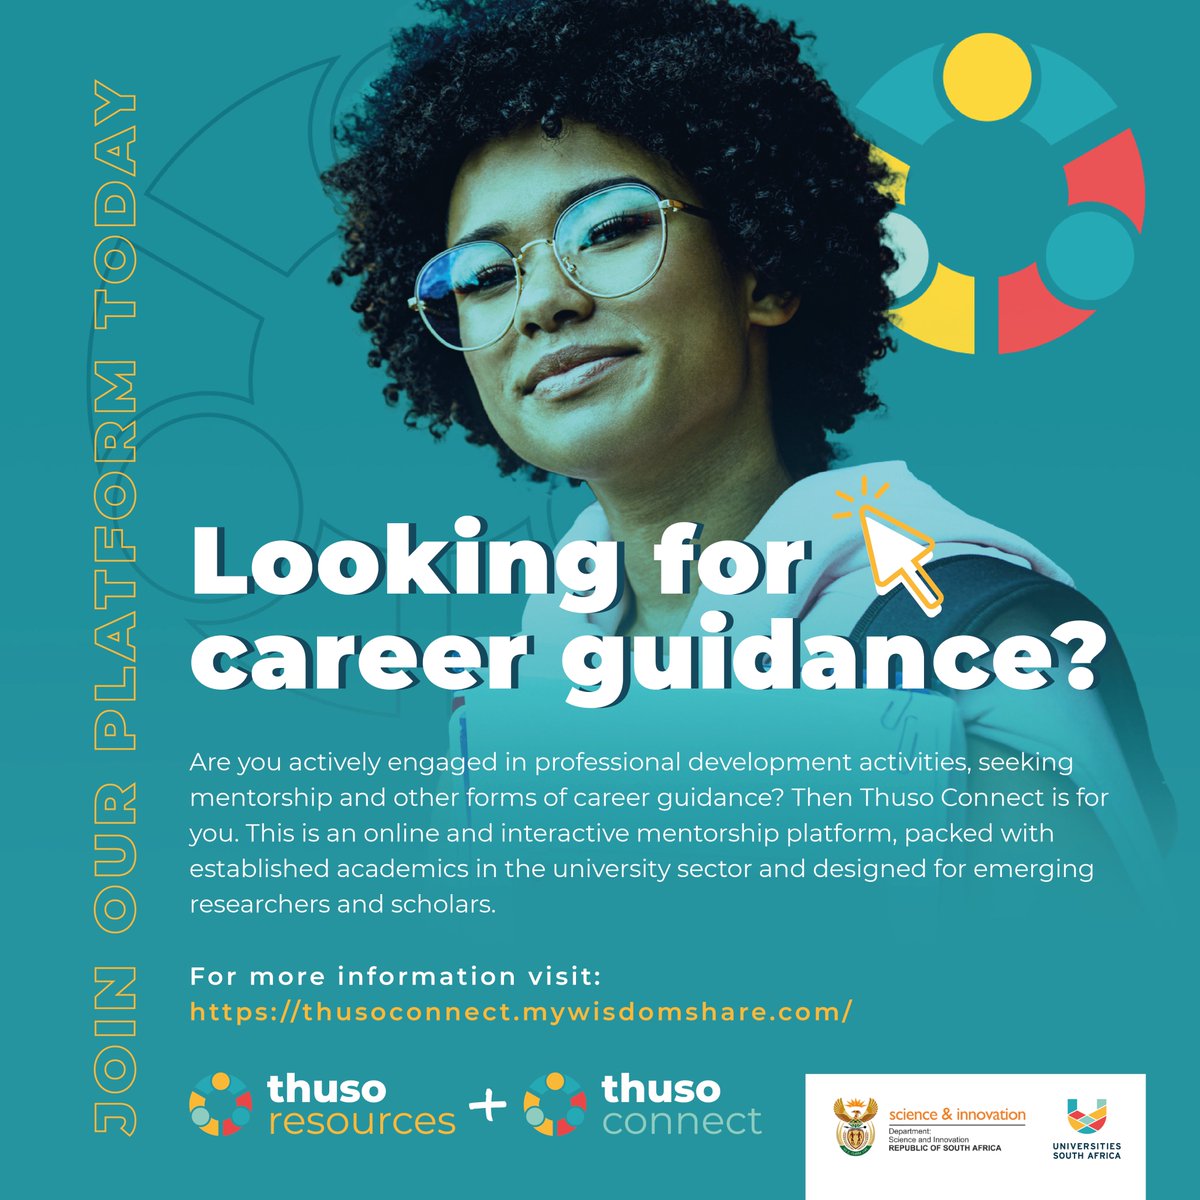 Have you heard about Thuso Connect? It is an online platform where South African Emerging Researchers and Scholars can access resources and info to help them grow and connect. Follow this link to their website for details: thusoresources.usaf.ac.za